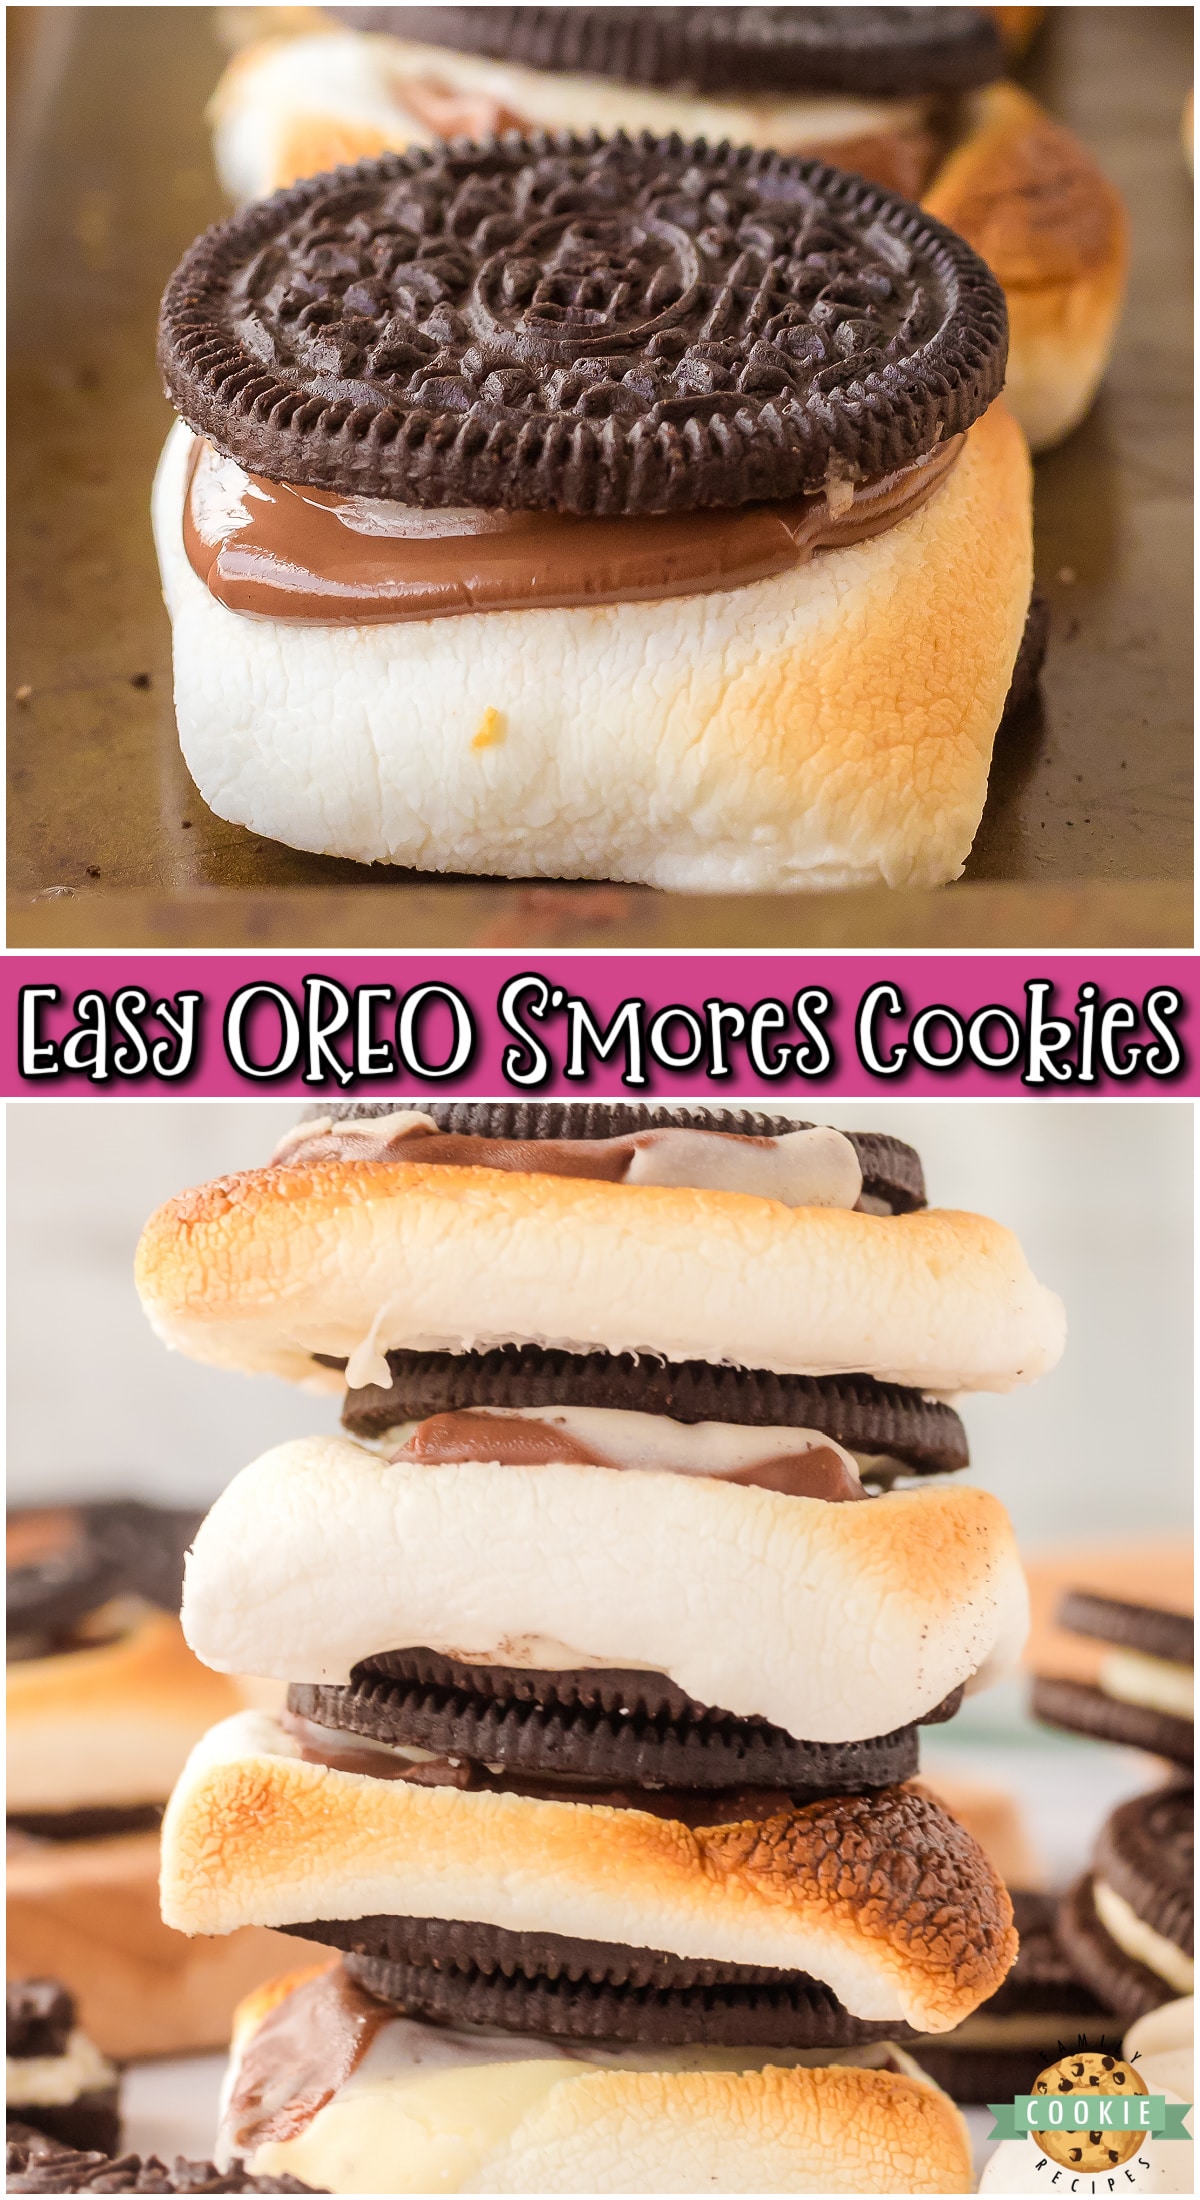 Oreo S’mores are gooey, sweet, crunchy & super chocolatey! These oven baked S’mores are sure to be your new summertime go-to dessert!